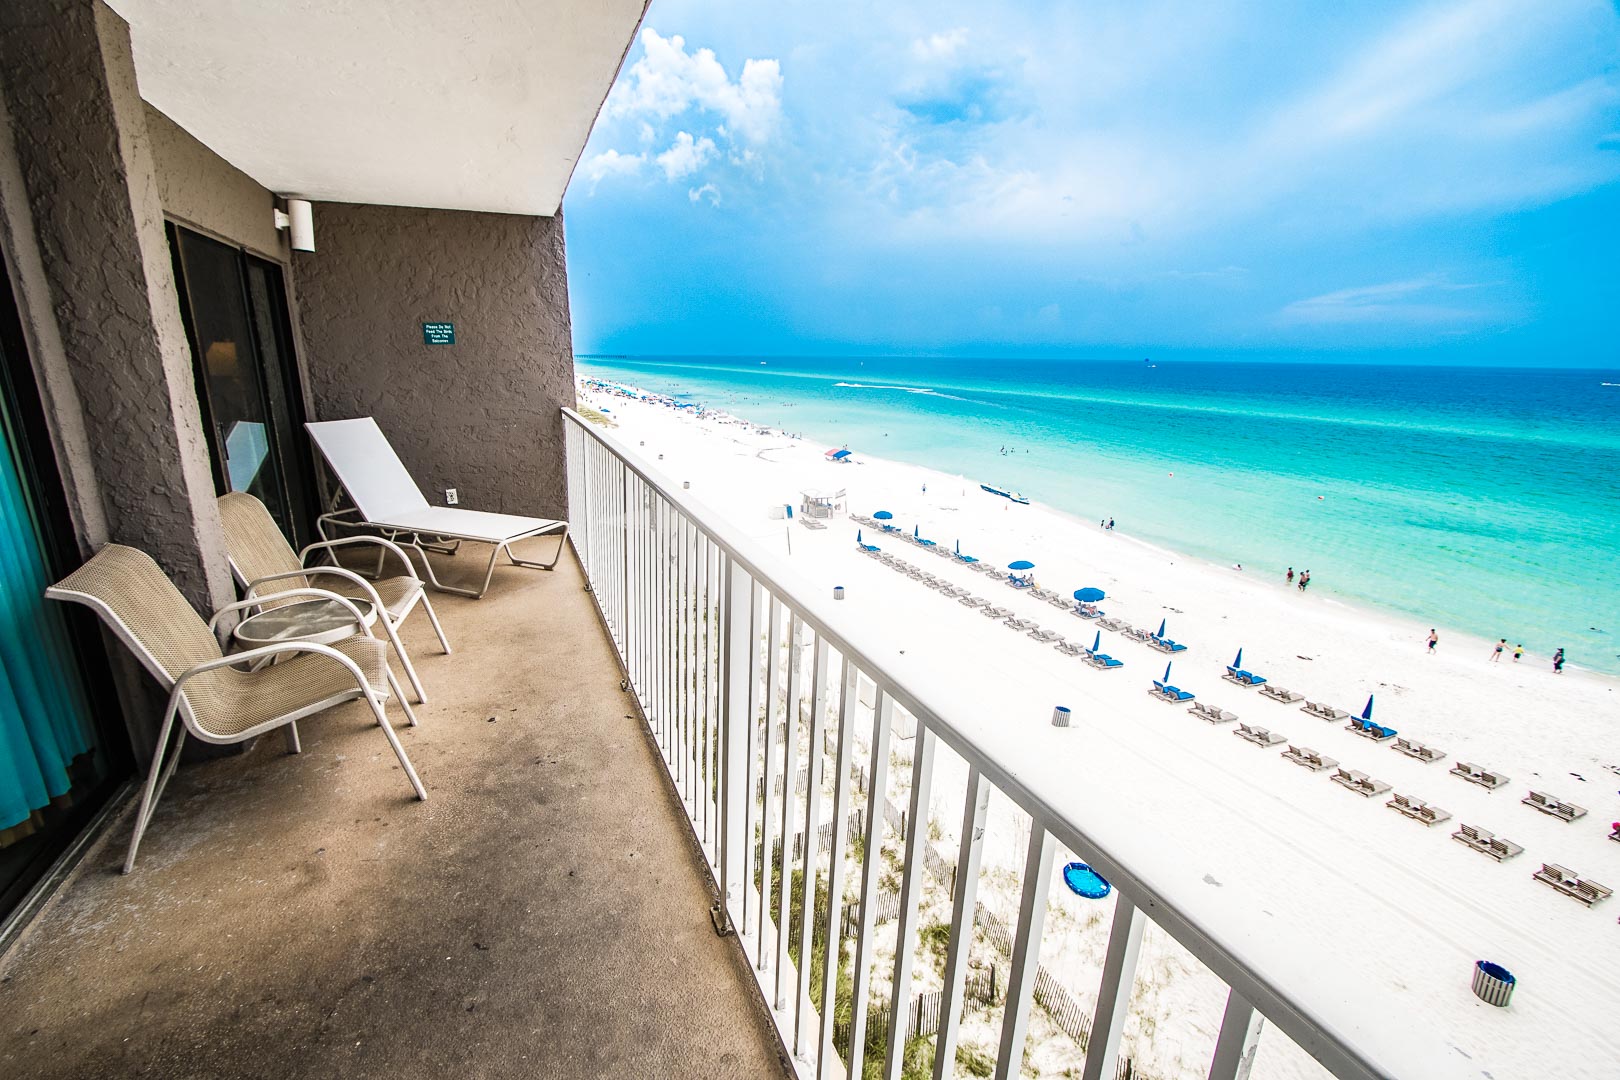 A relaxing view of the beach from the balcony at VRI's Landmark Holiday Beach Resort in Panama City, Florida.